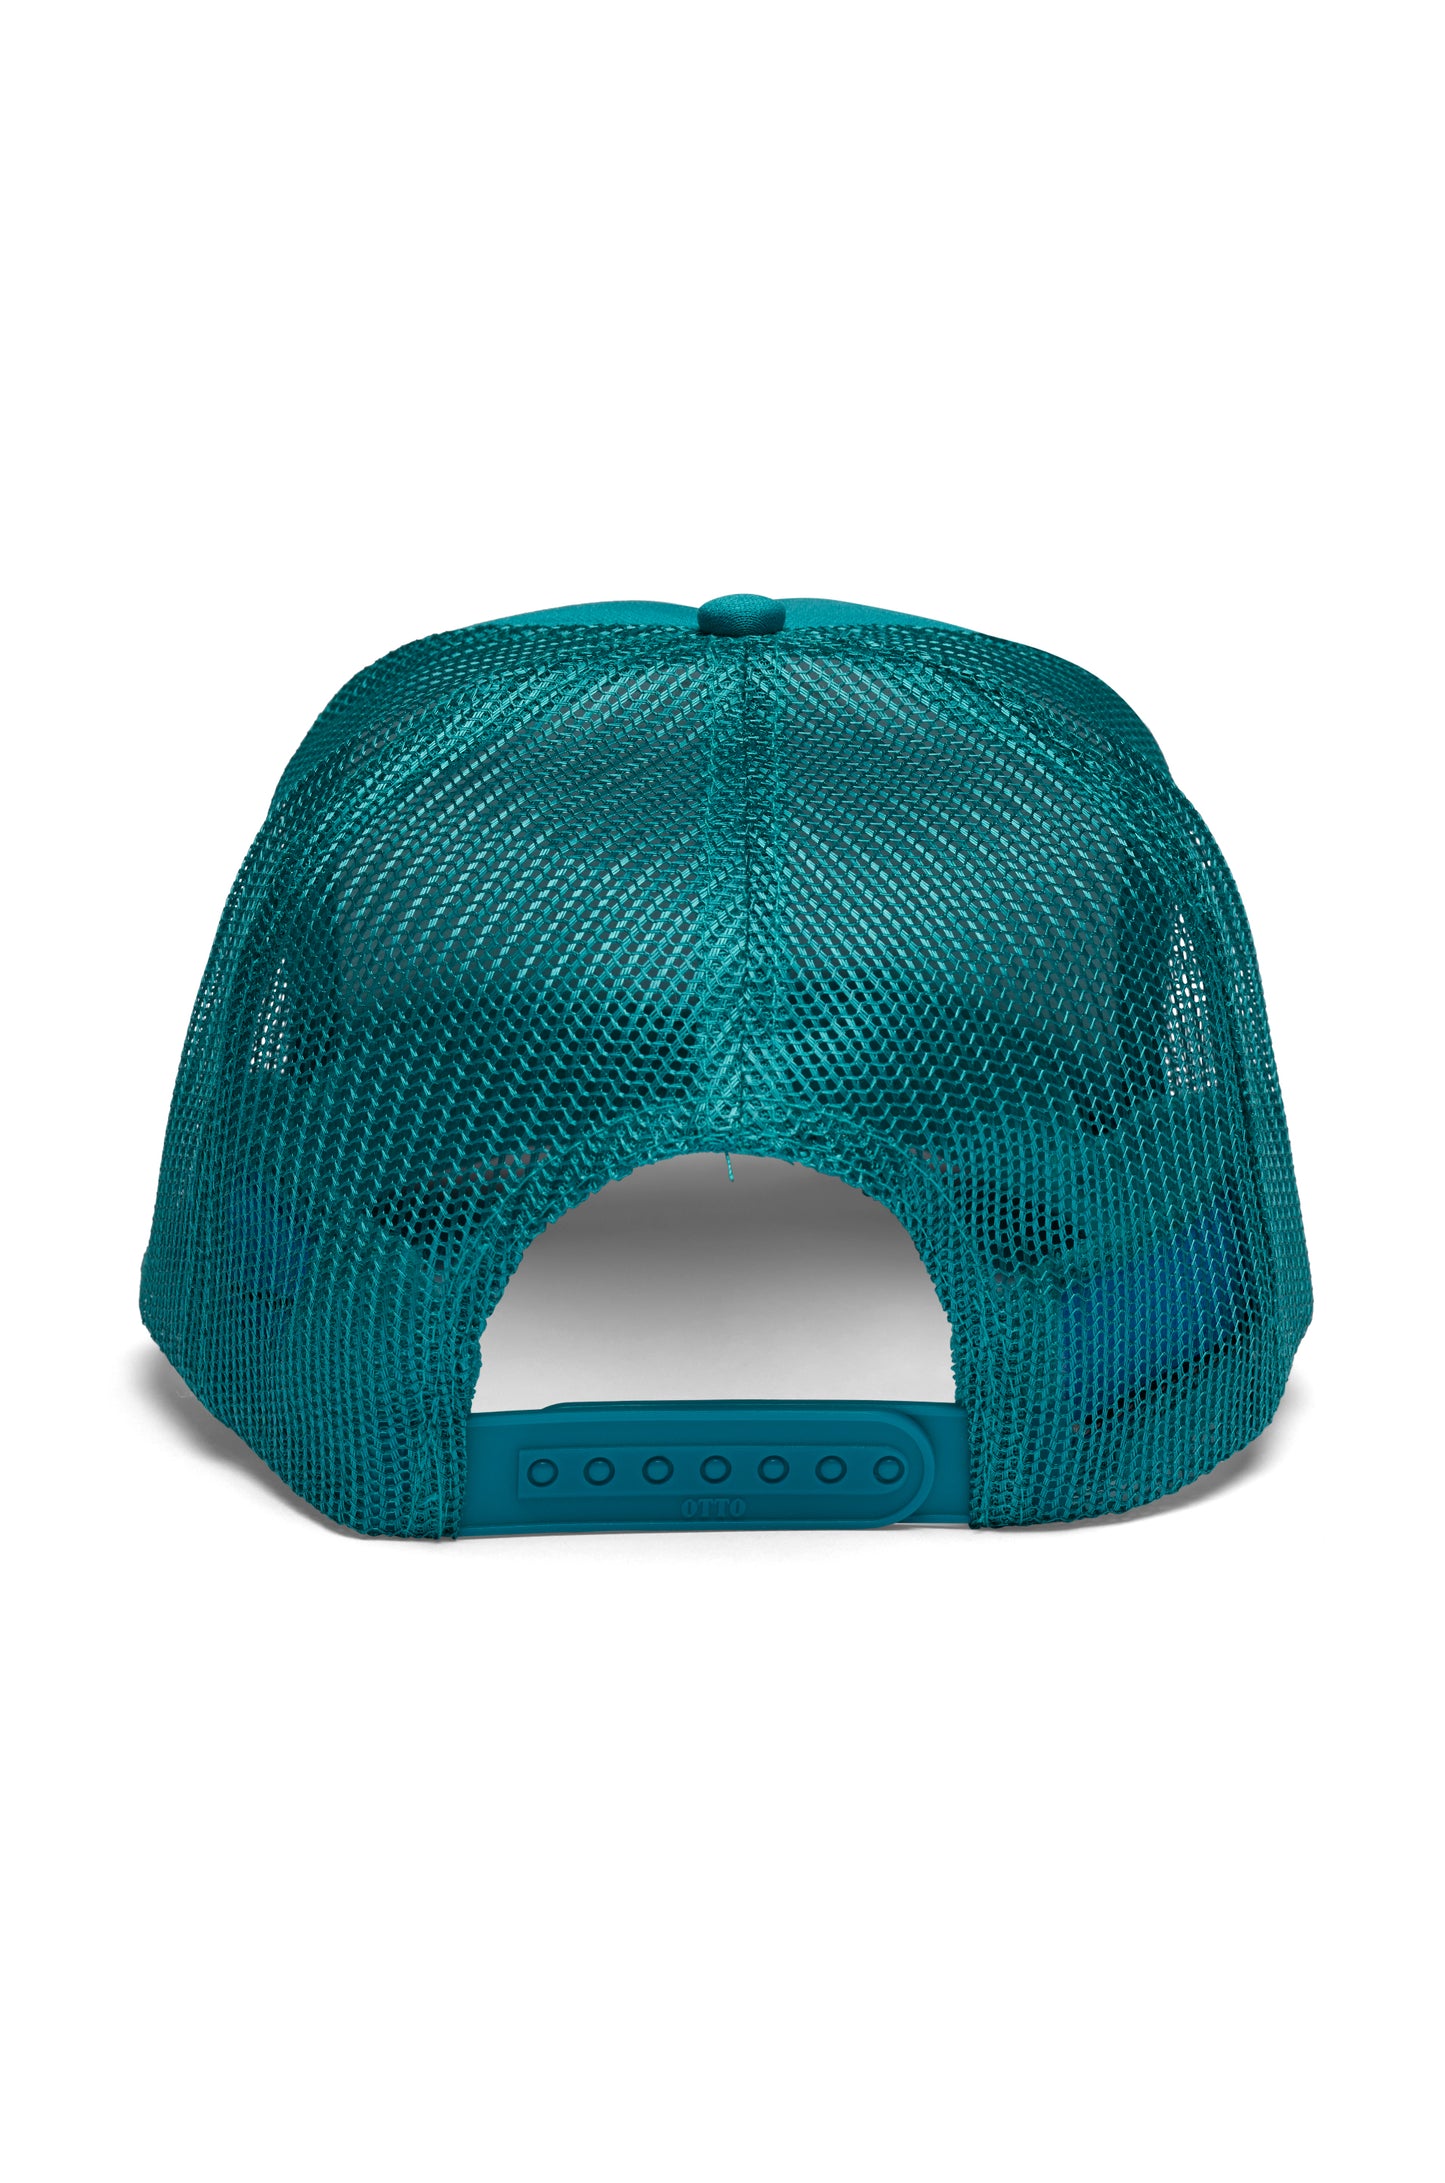 Pickle Ball Hat - Teal